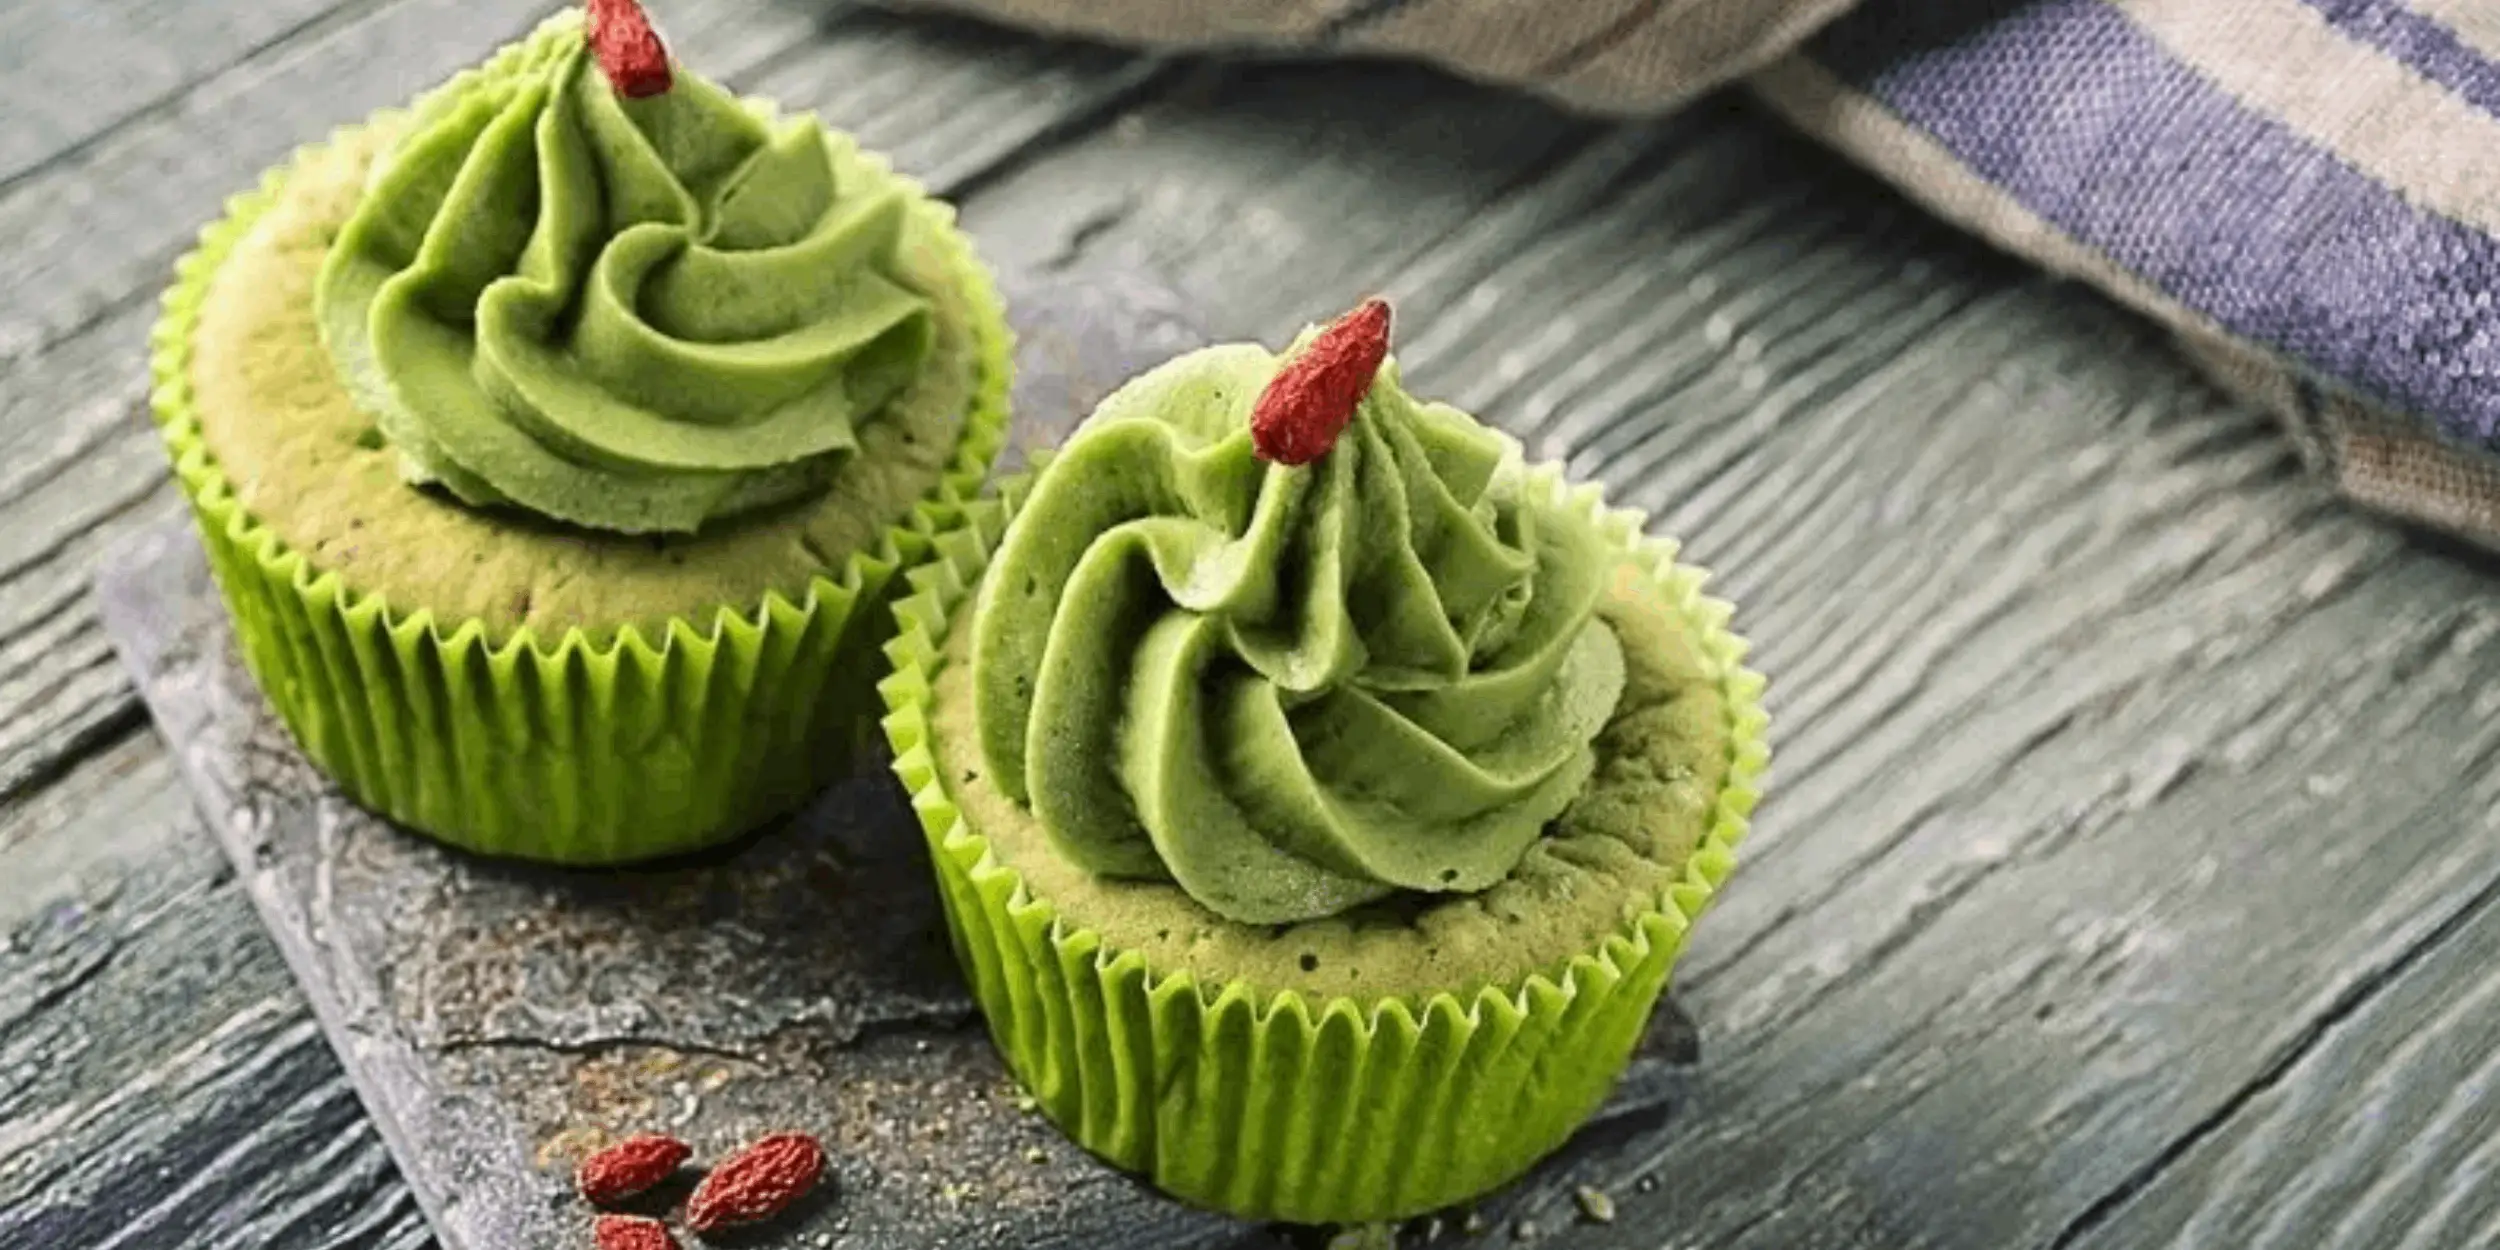 Kale Chips in Cupcake Form: The New Trend in Healthy Desserts